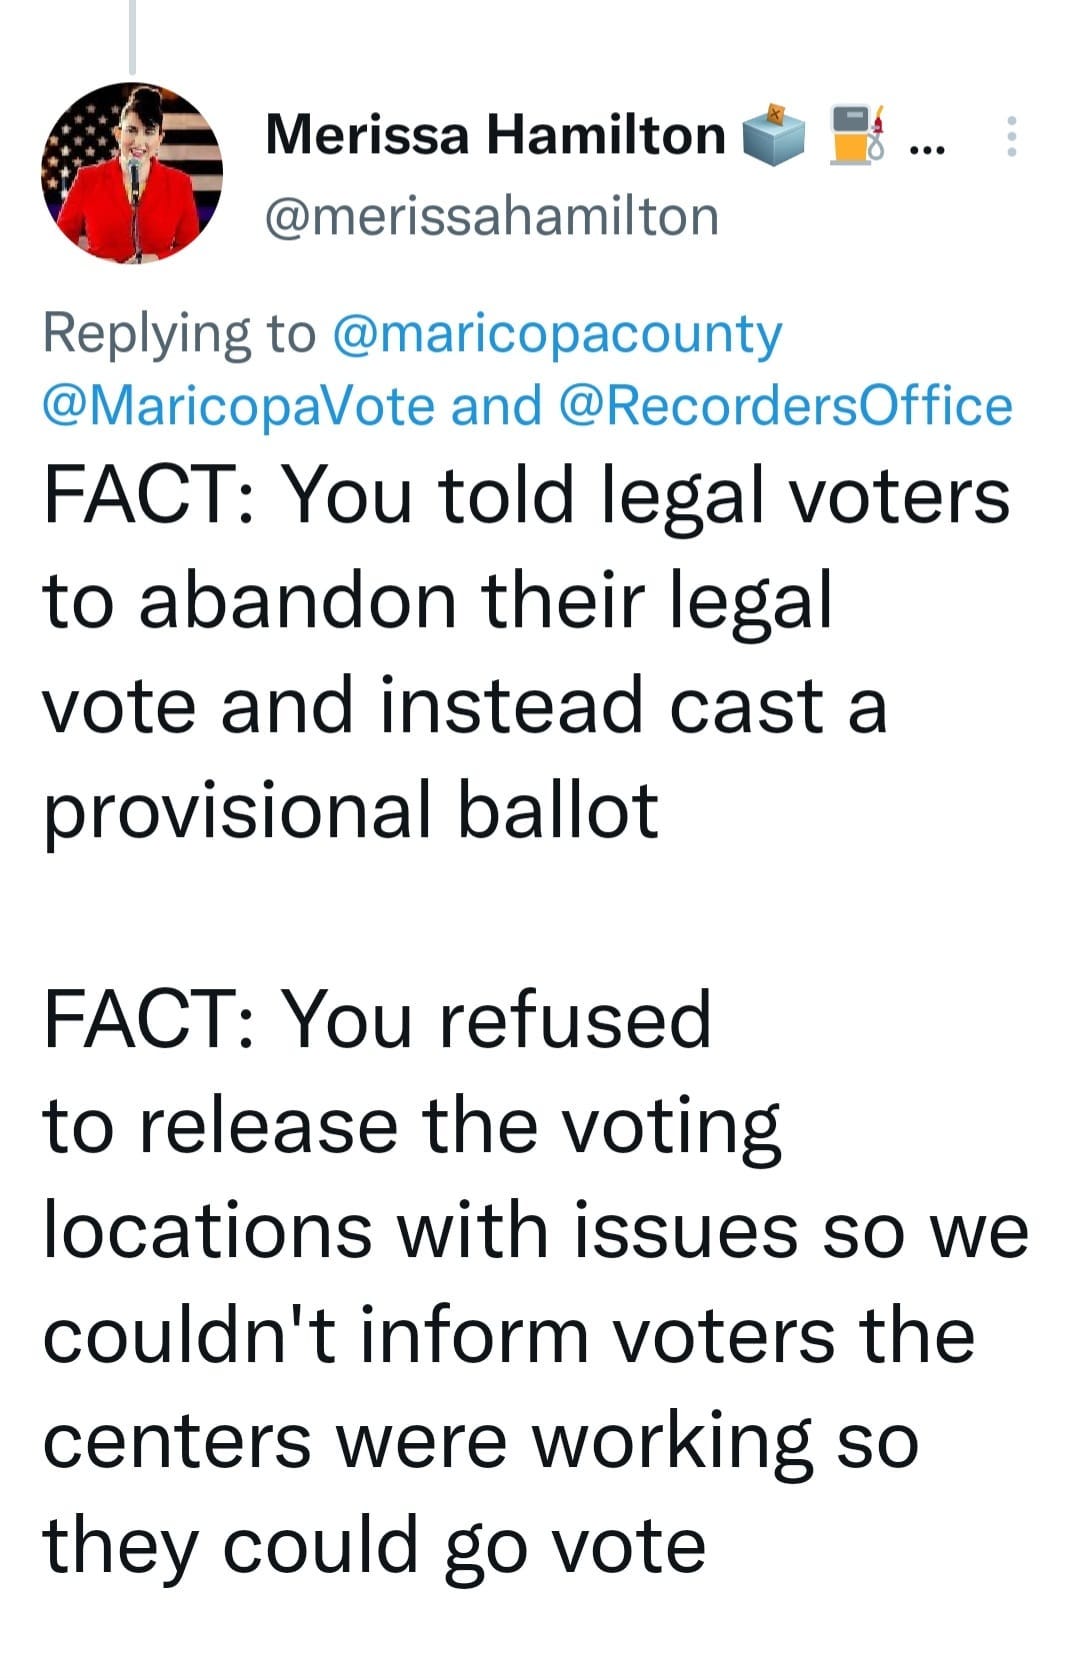 May be a Twitter screenshot of 1 person and text that says 'Merissa Hamilton @merissahamilton Replying to @maricopacounty @MaricopaVote and @RecordersOffice FACT: You told legal voters to abandon their legal vote and instead cast a provisional ballot FACT: You refused to release the voting locations with issues so we couldn't inform voters the centers were working so they could go vote'